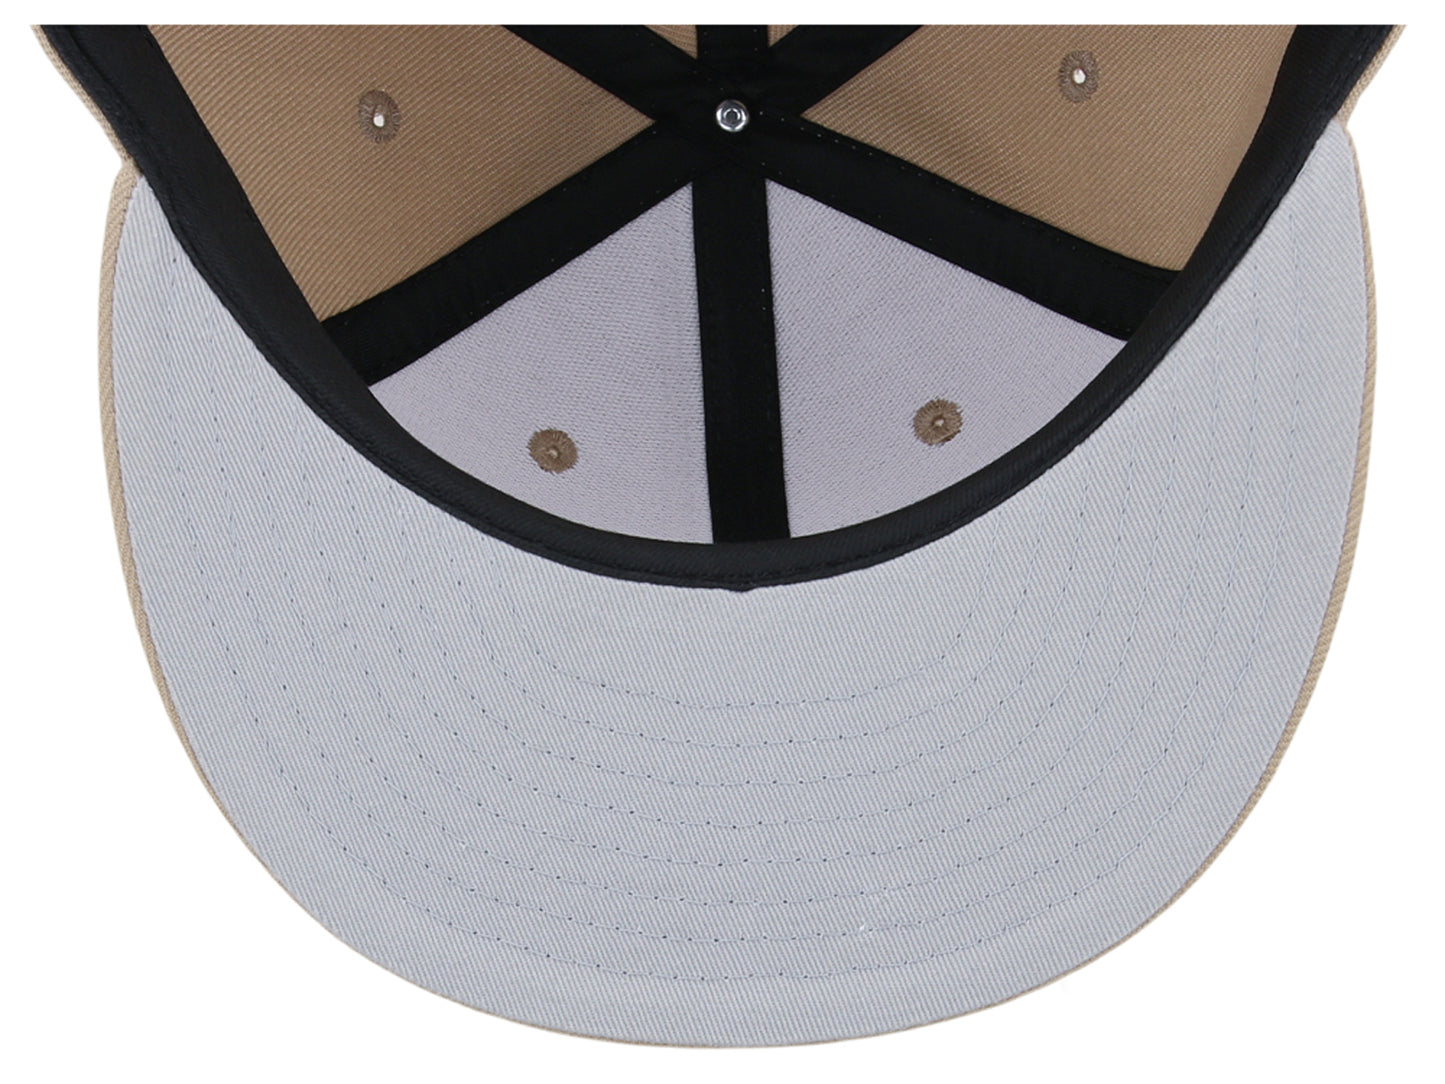 Crowns By Lids Full Court Fitted Cap - Khaki